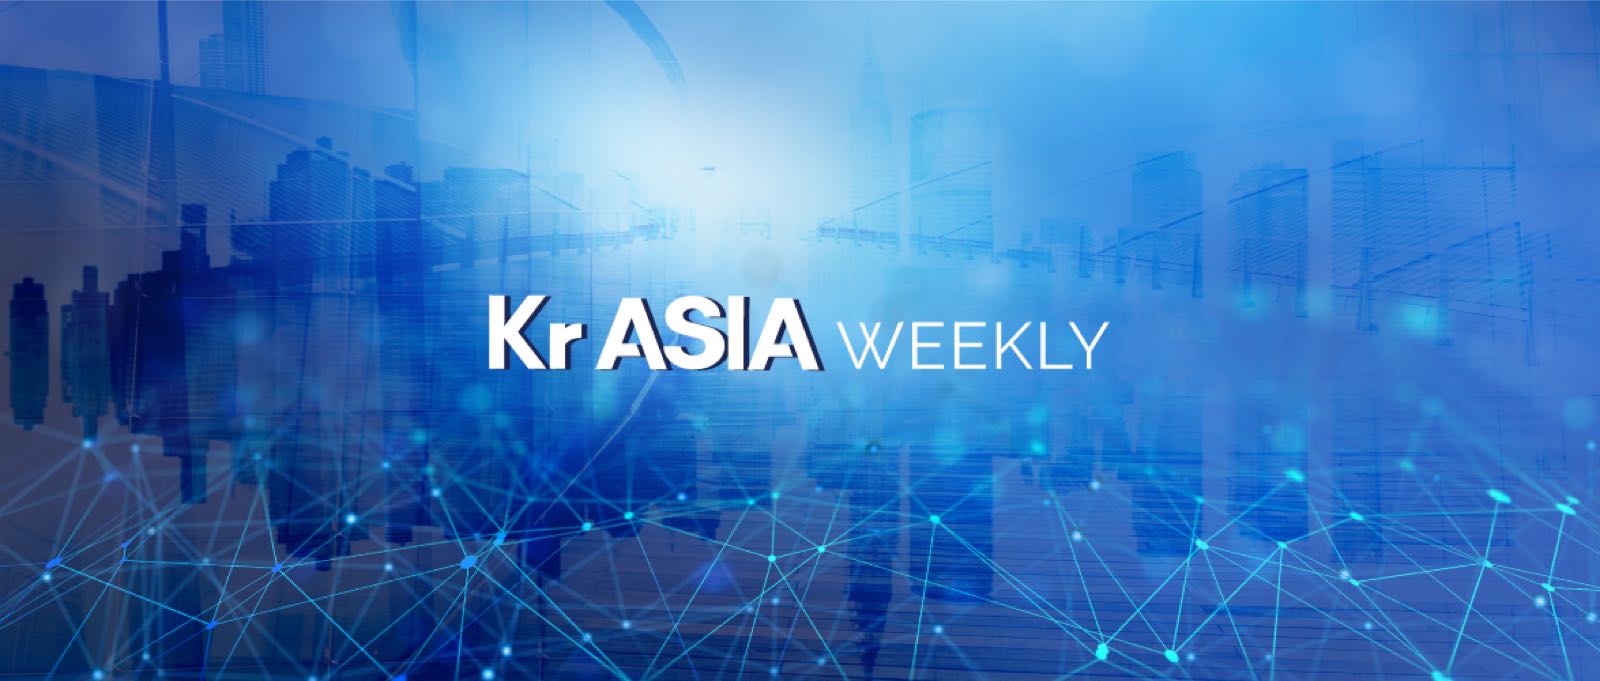 KrASIA Weekly: Xiaomi unexpectedly scrapped its CDR listing but powers on for HKEX IPO this week